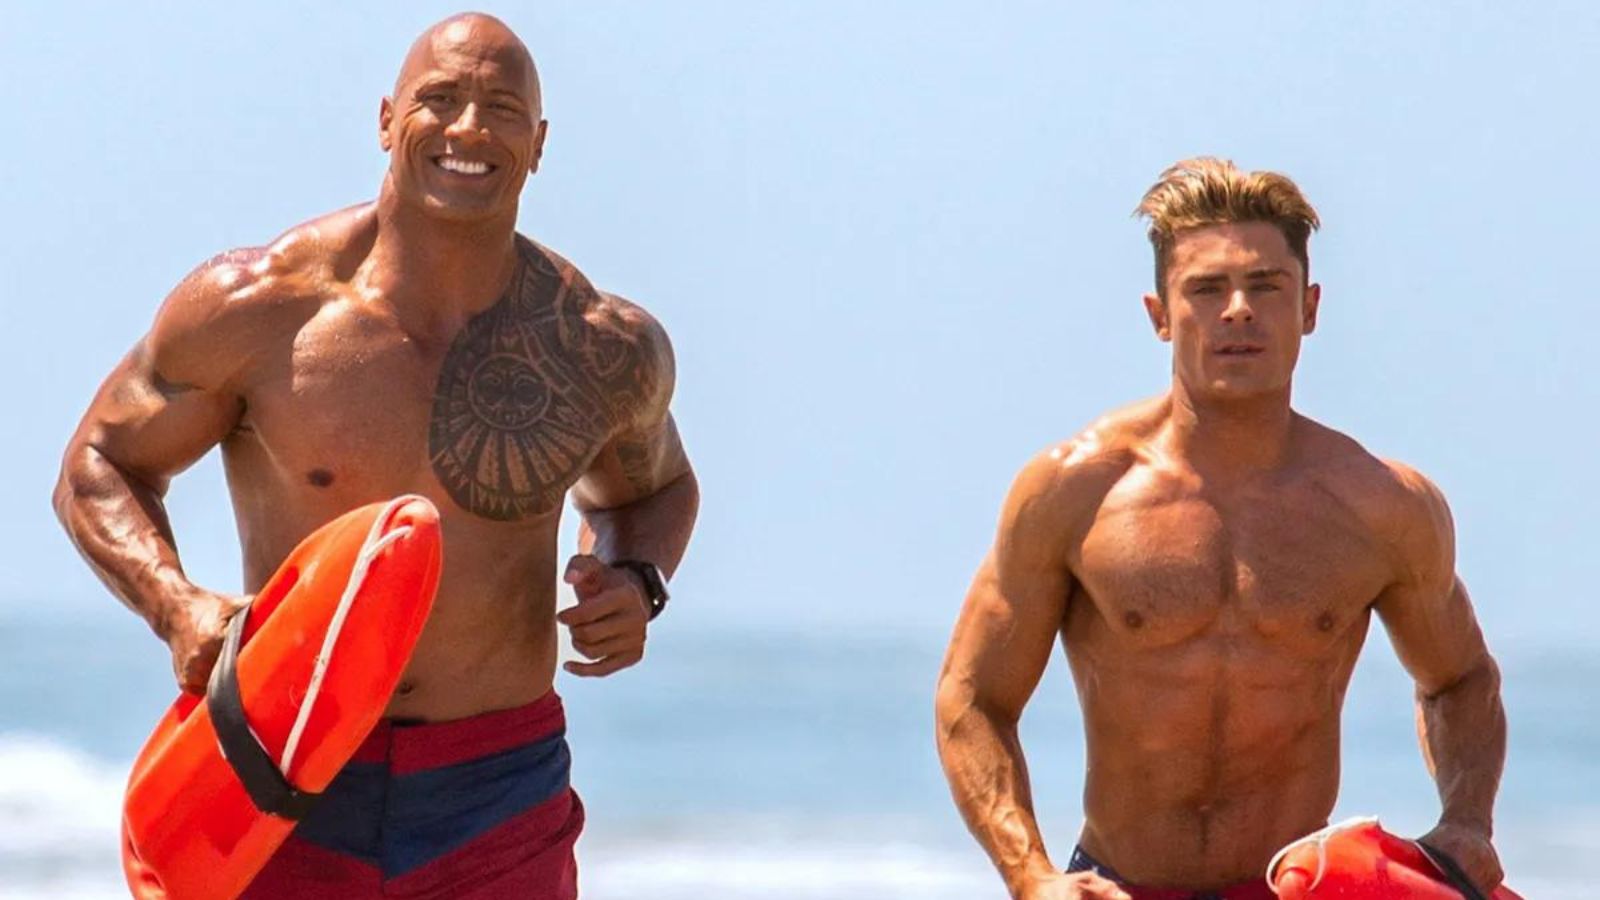 8. The Real Reason Zac Efron Dyed His Hair Blonde for 'Baywatch' - wide 2